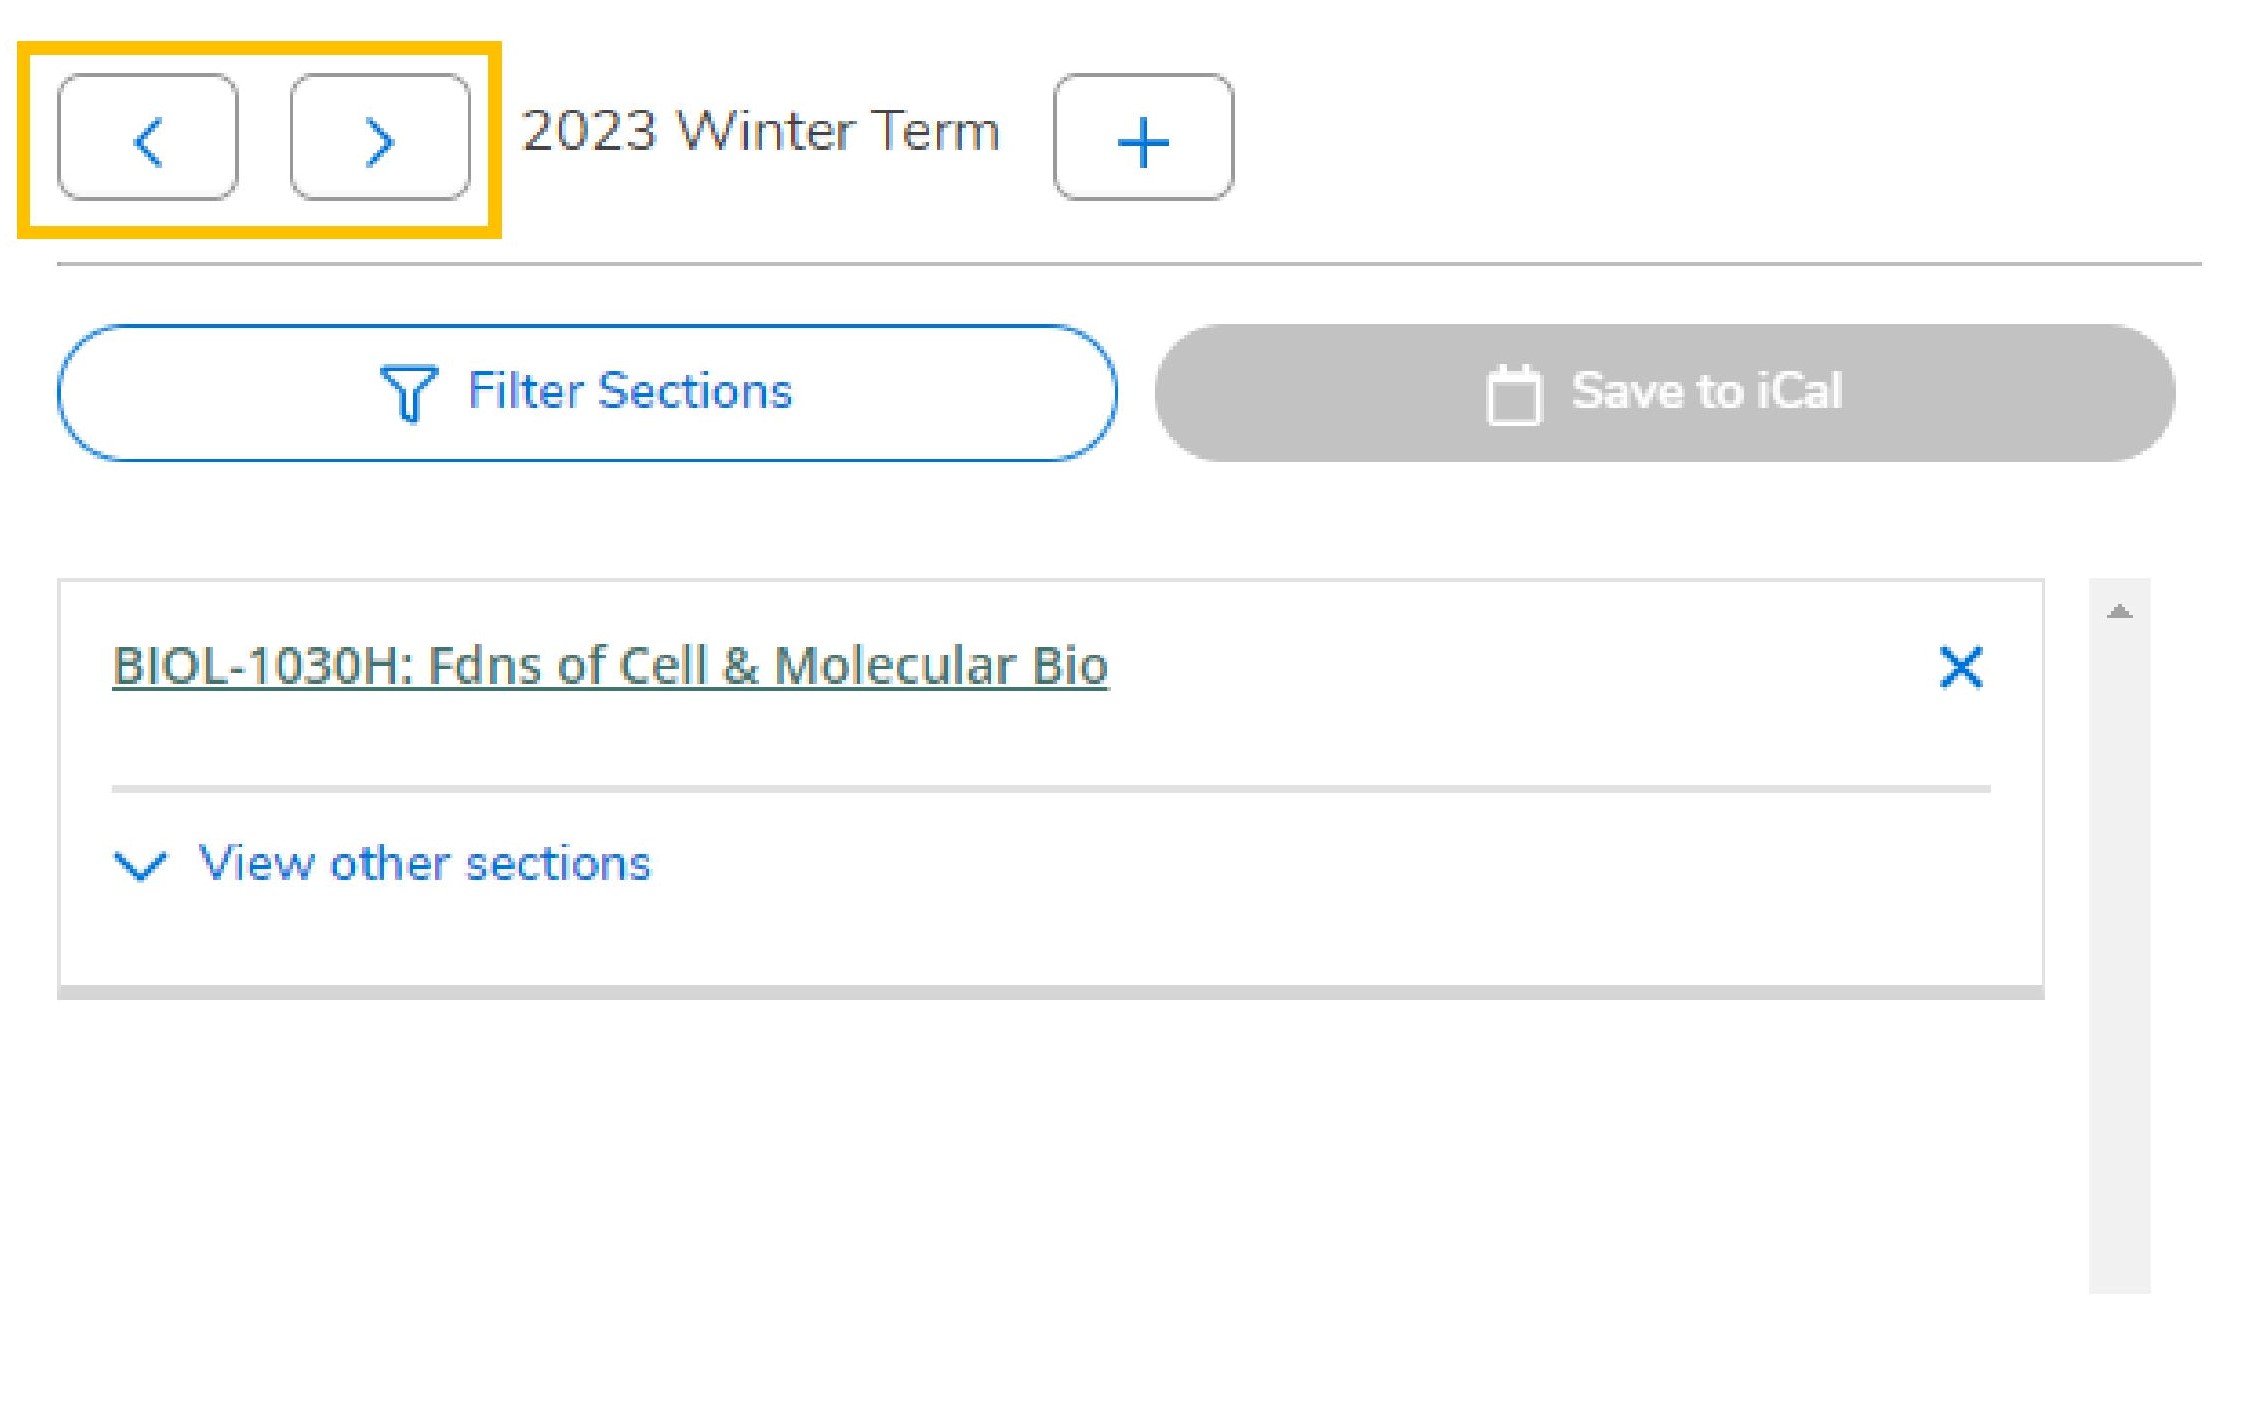 Once all courses are added, go back to the home page of self-service, and then click on the Student Planning and Registration icon, then click on “Plan your degree and register for your courses” at the top of the page. By default, this will load the current term. Click on the arrow to get to the summer term. Note that S12, S61, and S62 are treated as distinct terms and you will need to go through this process separately for each term.